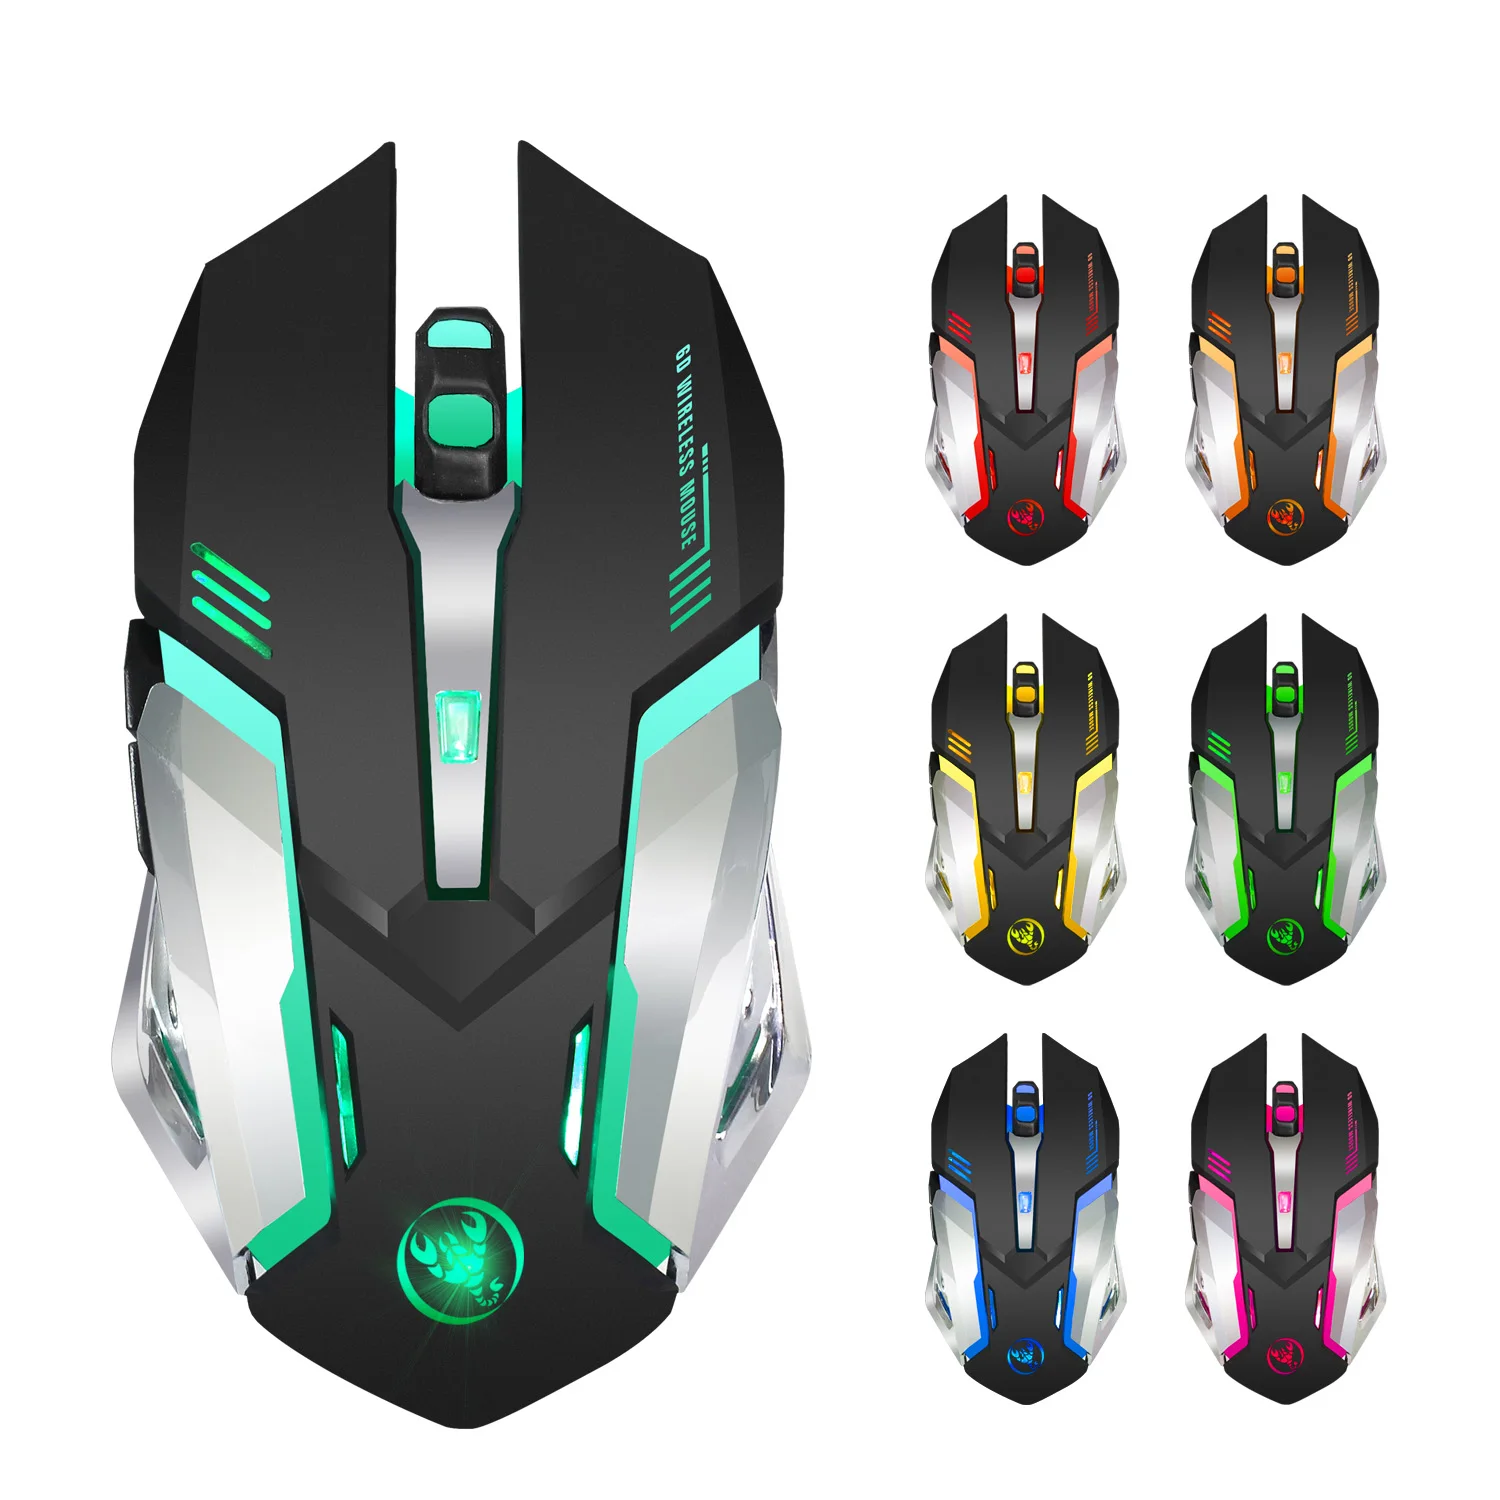 

HXSJ M10 Rechargeable 2.4GHz Wireless Gaming Mouse 2400DPI 7 Colors Backlight Breathing Gamer Mice for Computer Desktop Laptop